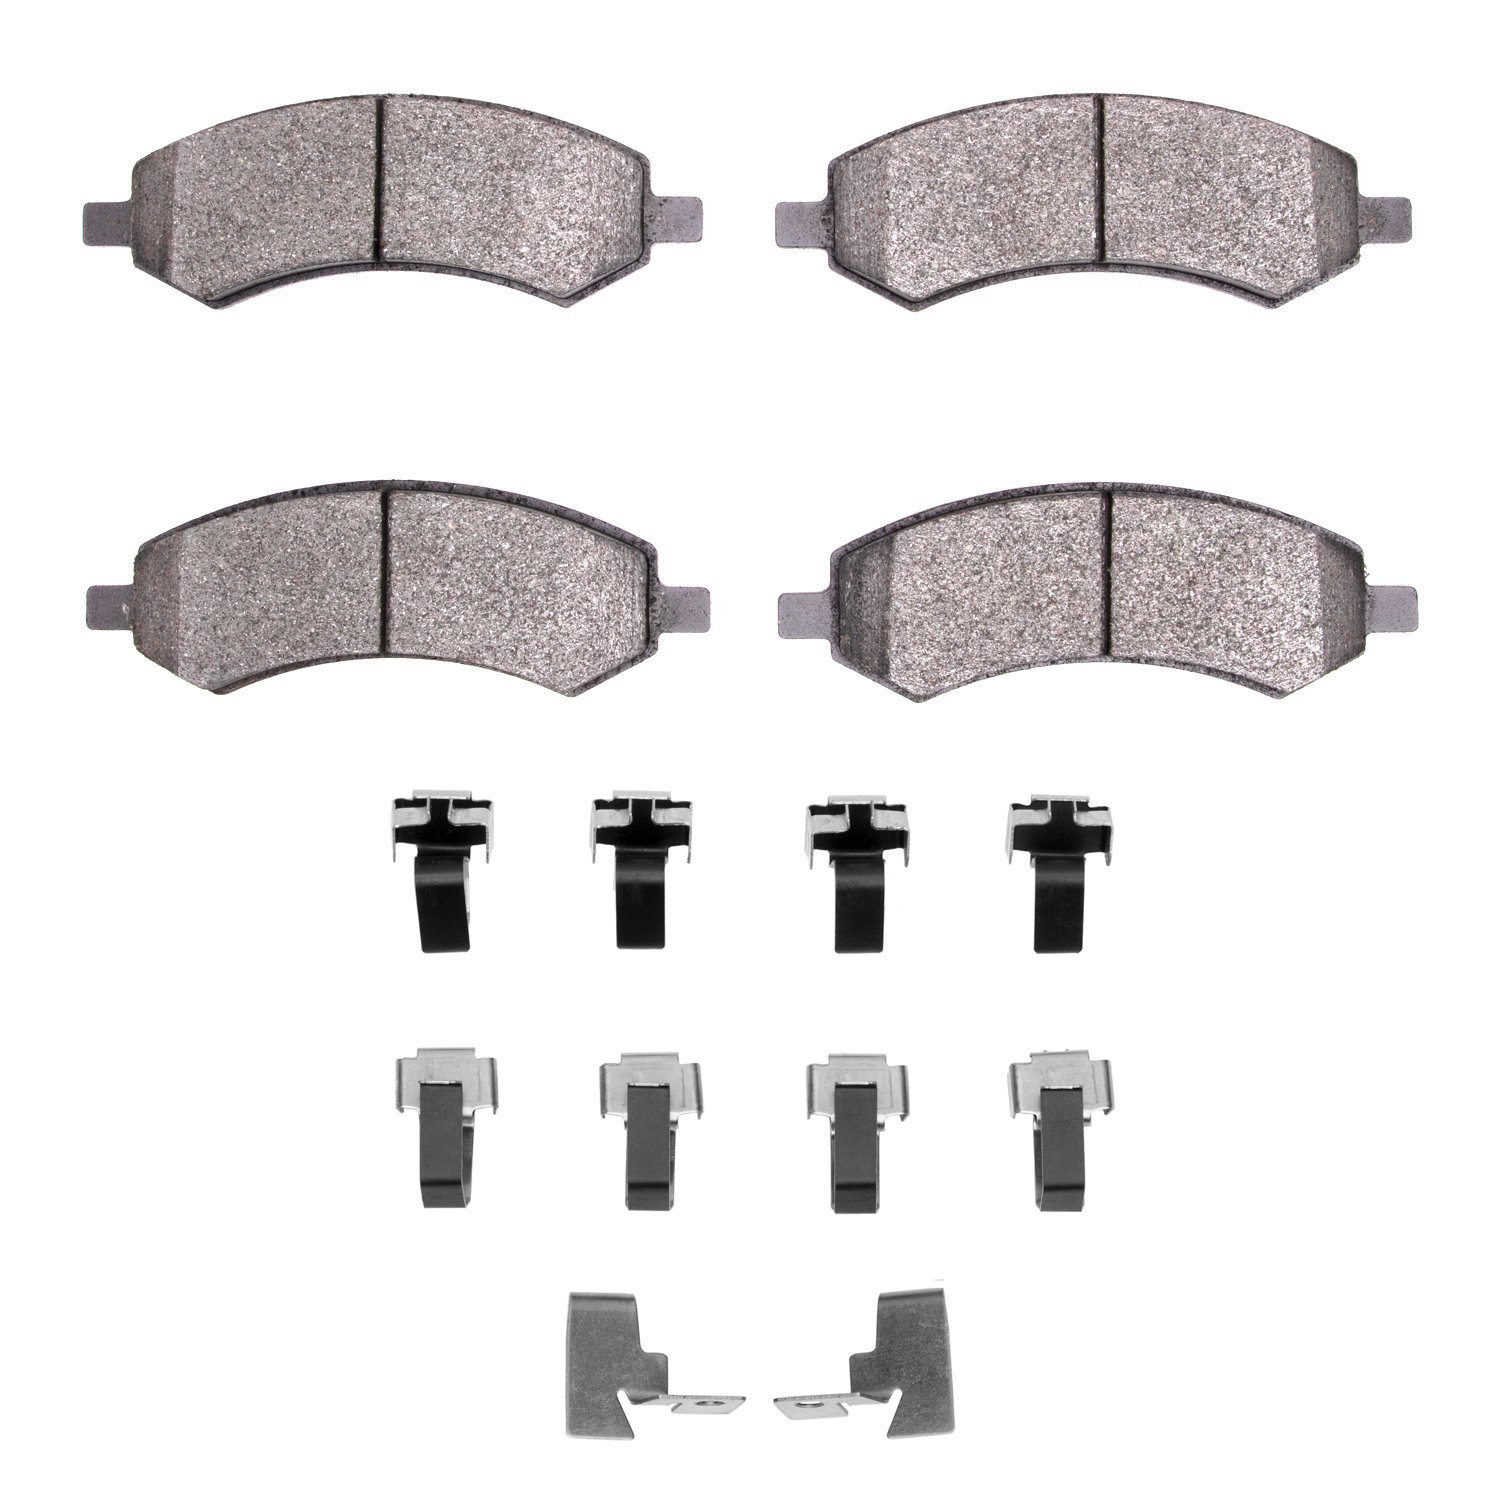 1214-1084-01 Heavy-Duty Brake Pads & Hardware Kit, Fits Select Multiple Makes/Models, Position: Front